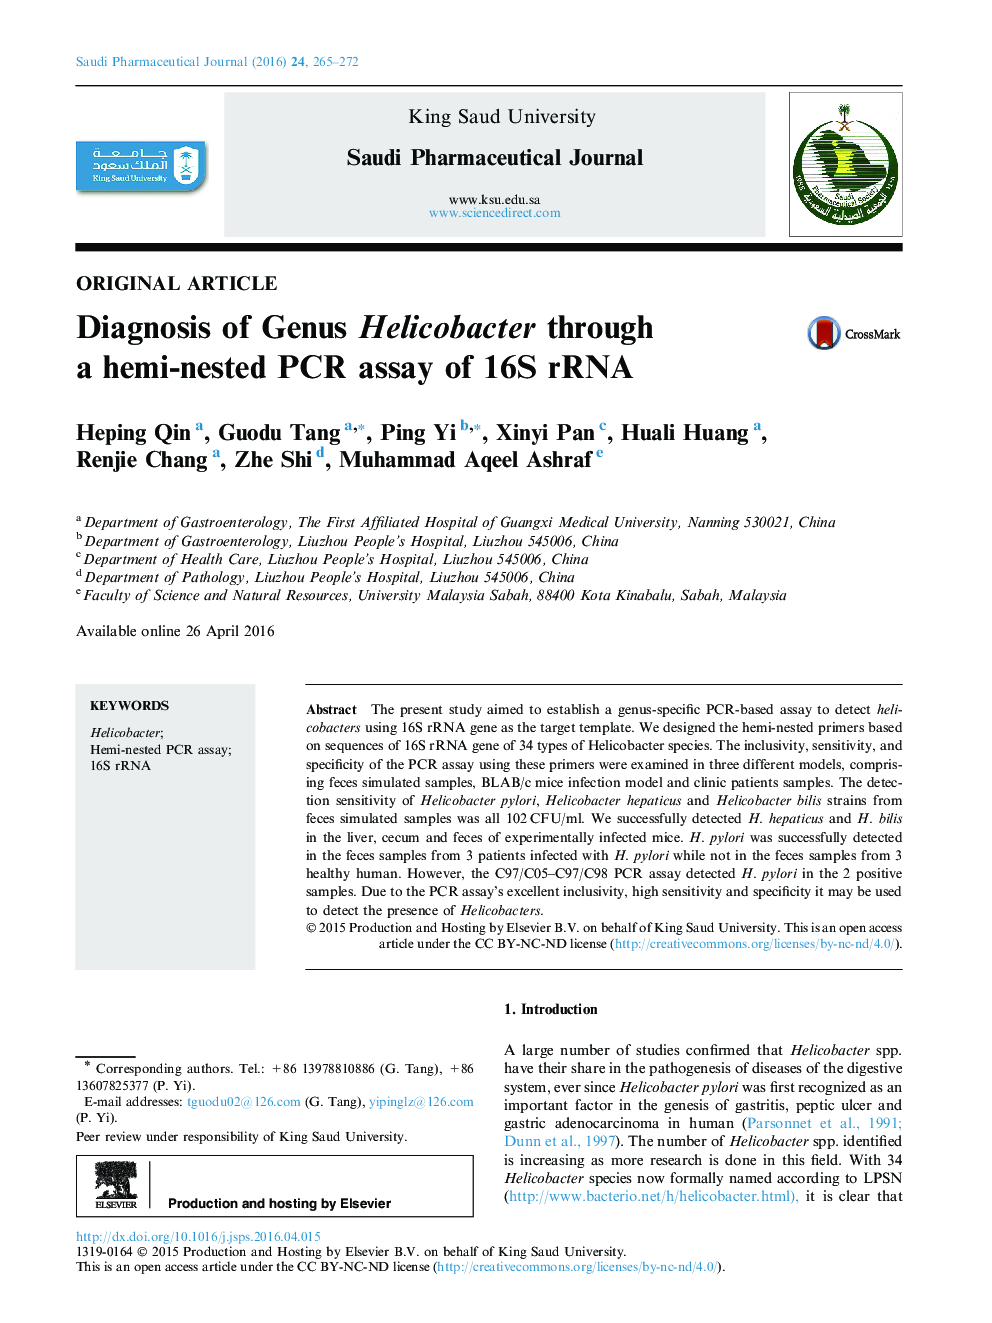 Diagnosis of Genus Helicobacter through a hemi-nested PCR assay of 16S rRNA 